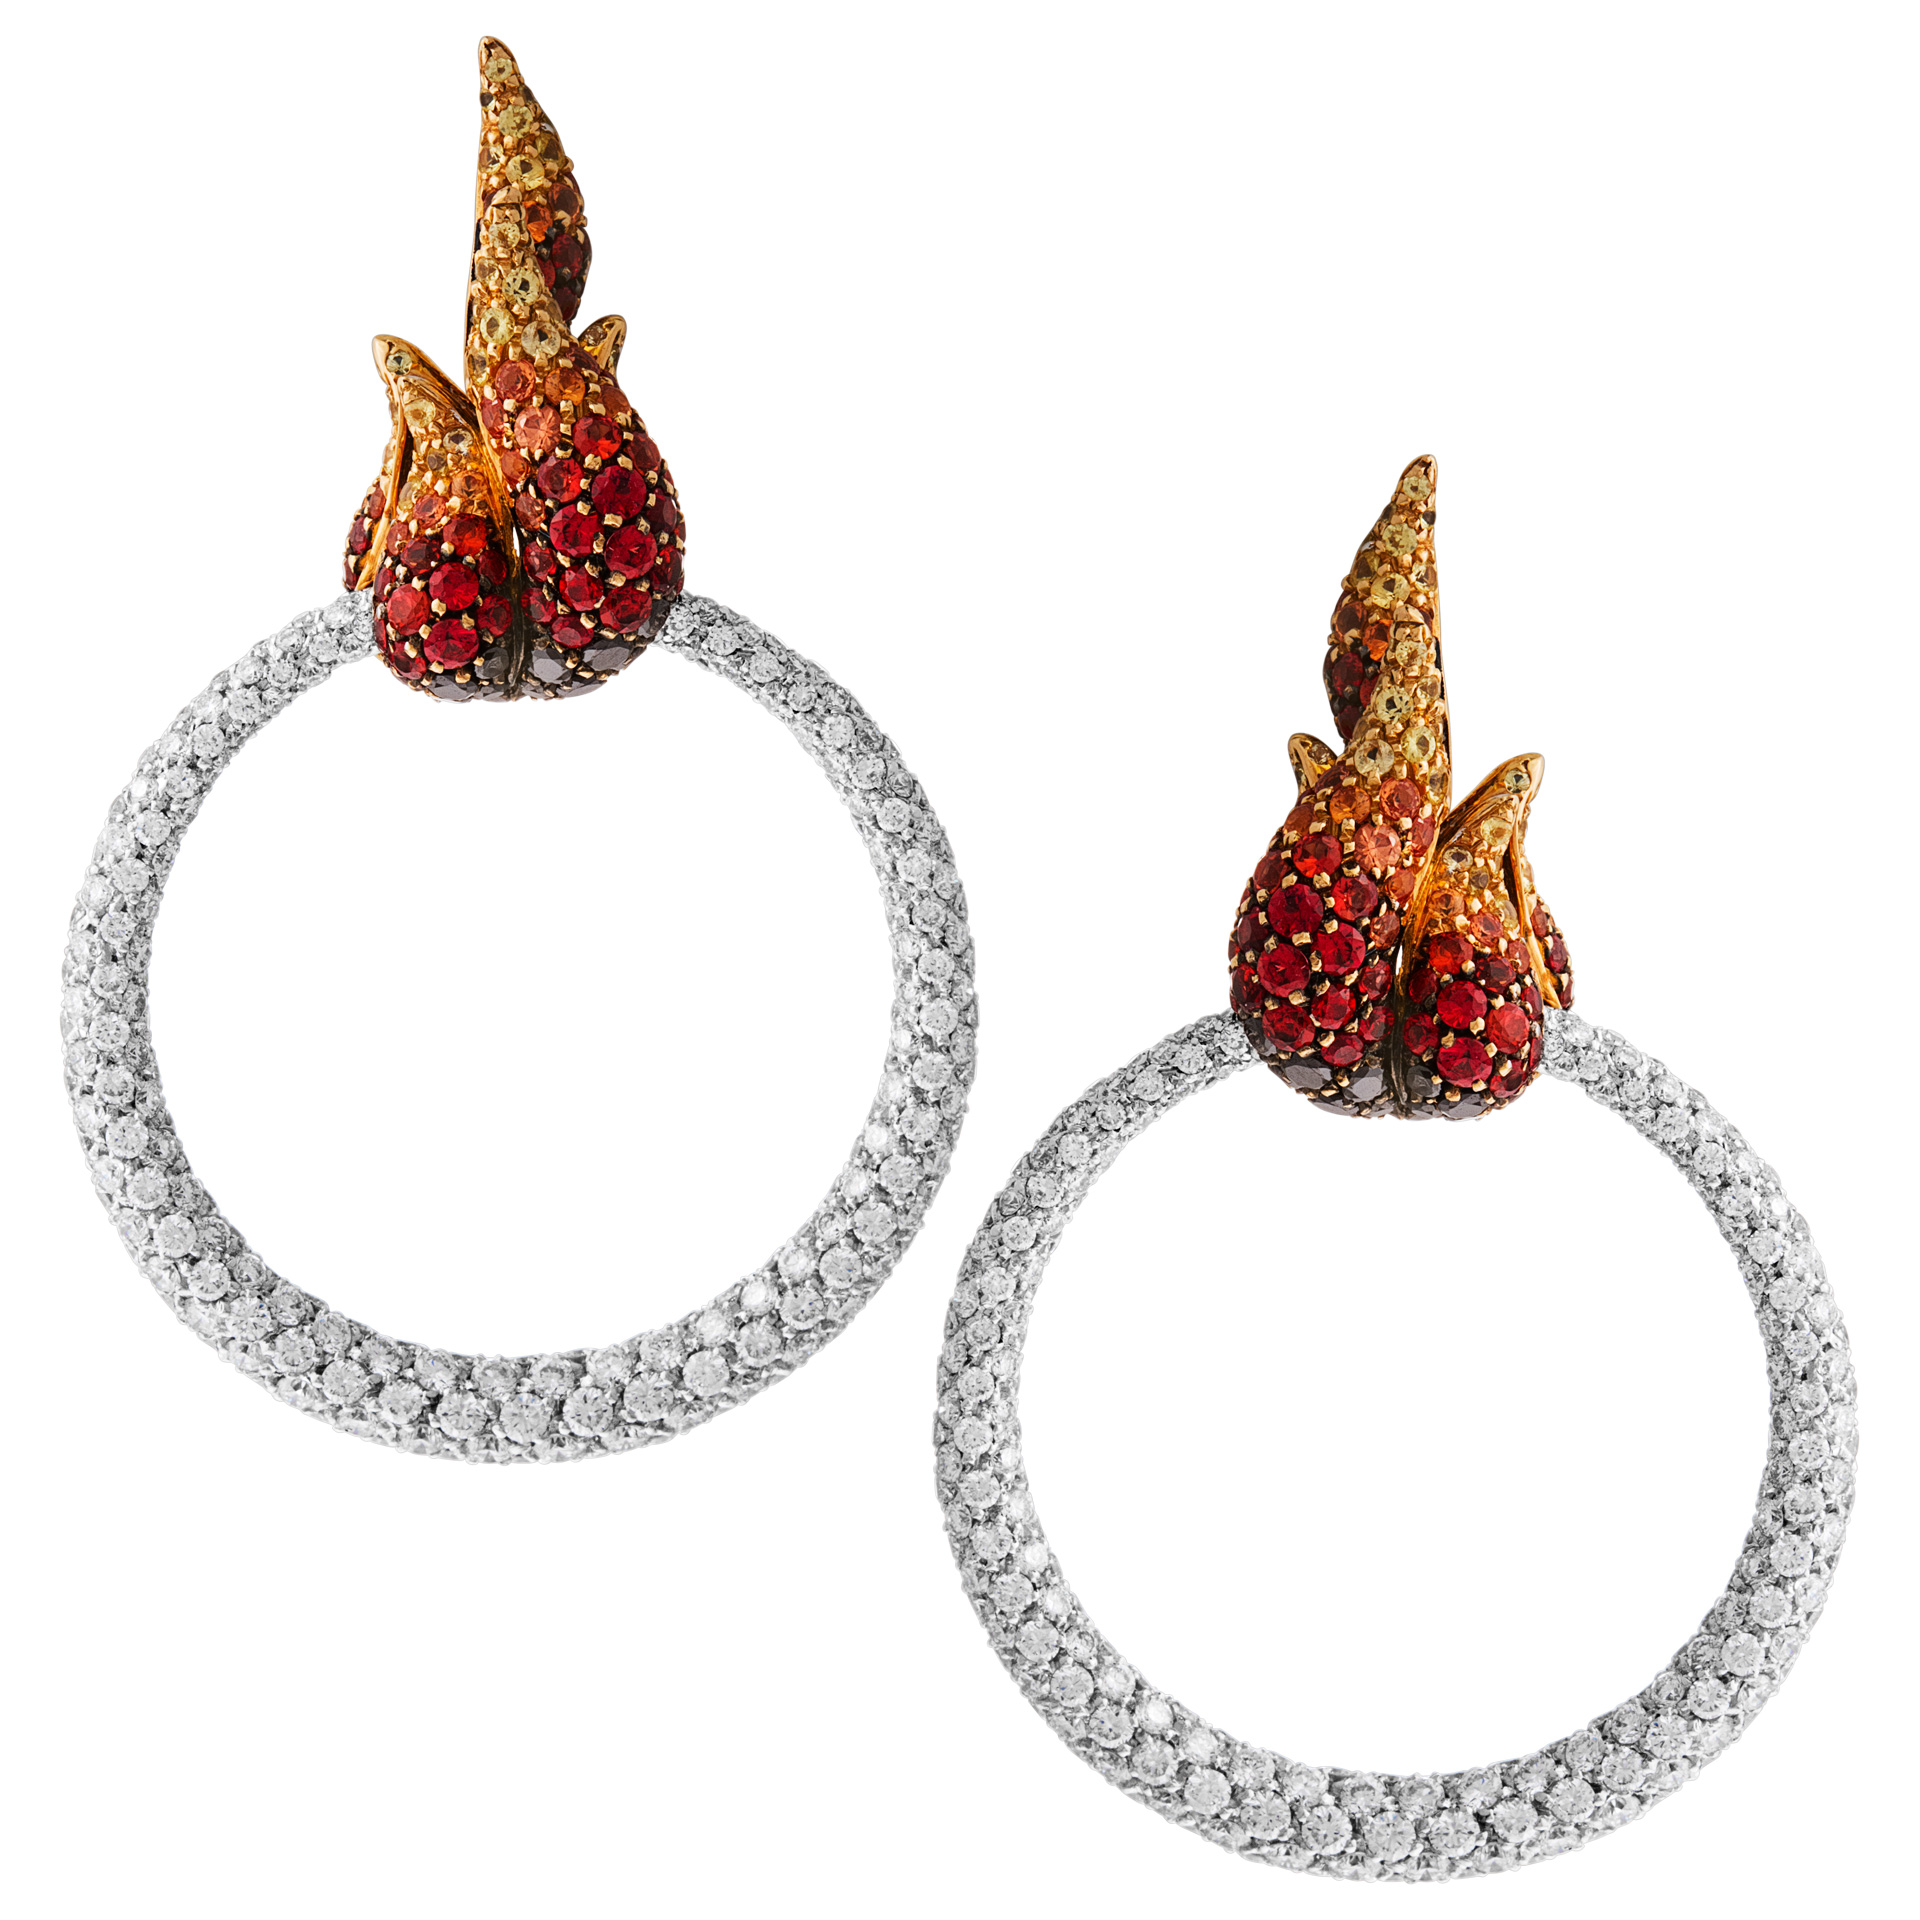 18k white and yellow gold pave diamond hoop earrings with graduating flames in multi color sapphires image 1